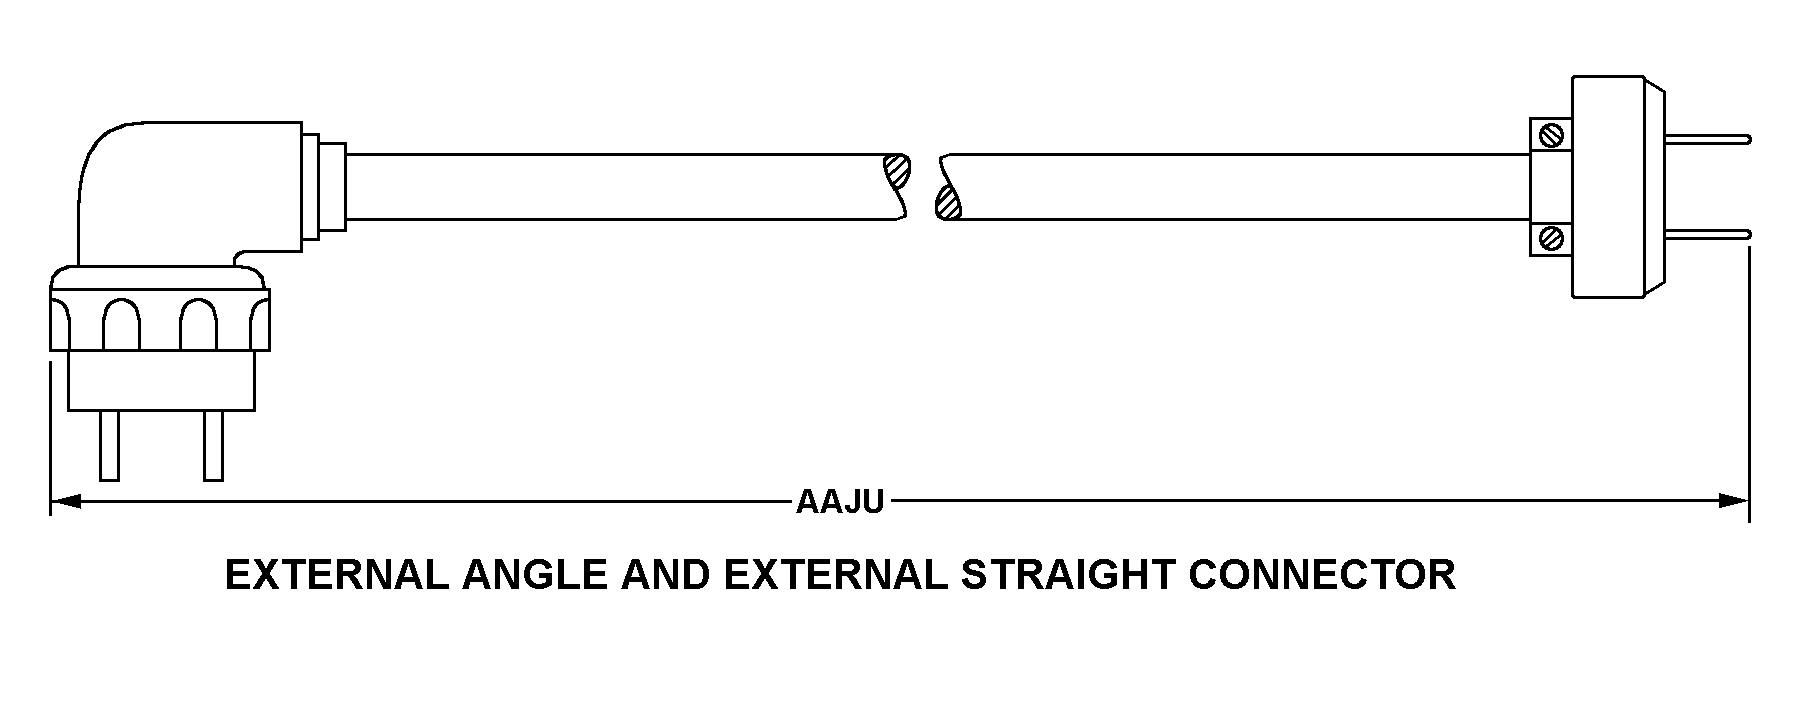 EXTERNAL ANGLE AND EXTERNAL STRAIGHT CONNECTOR style nsn 5995-01-574-8666